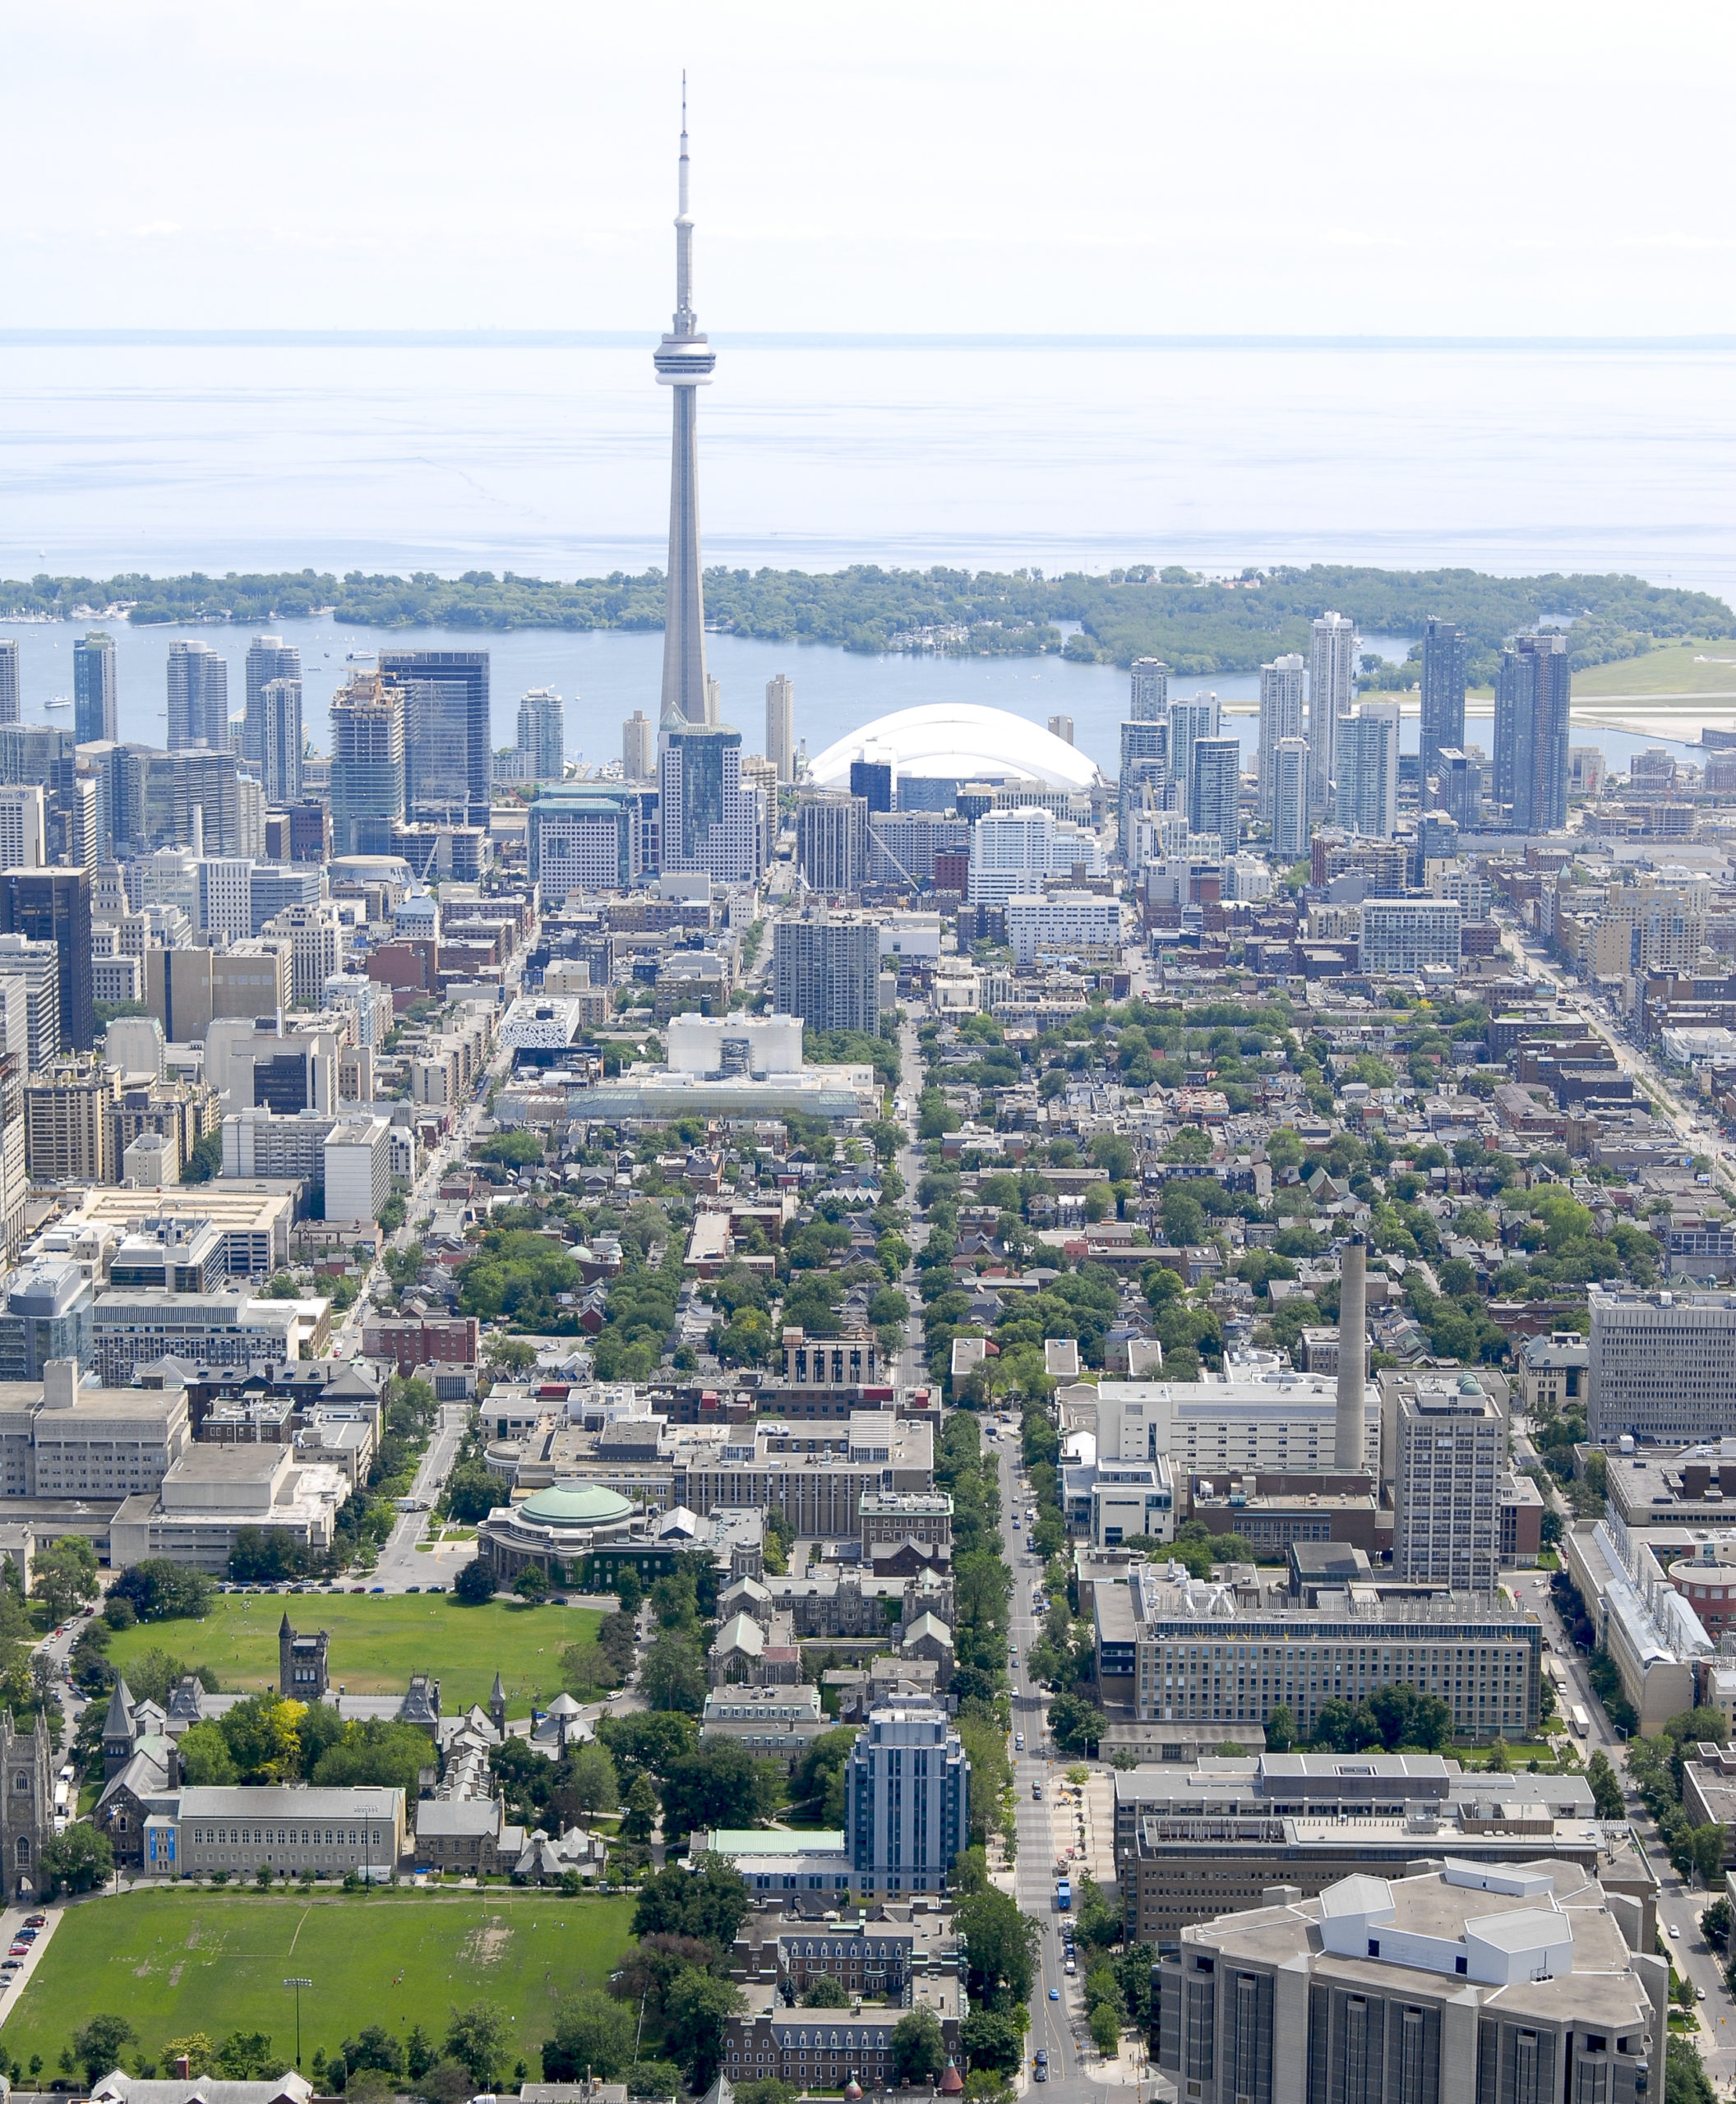 Aerial view of St. George campus looking South, with CN Tower.